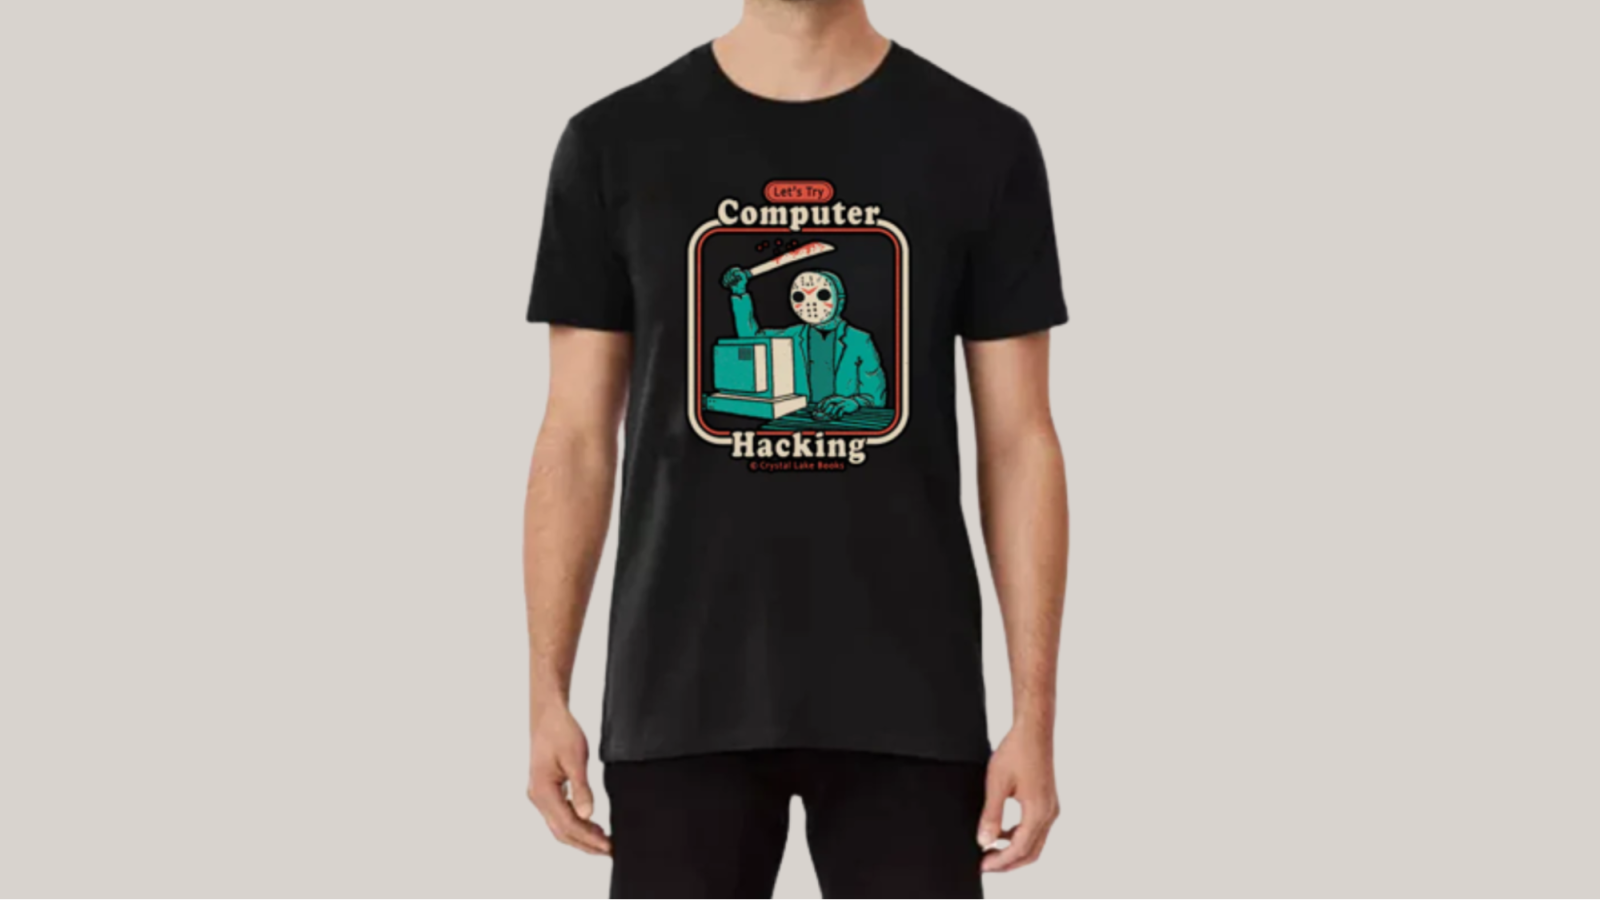 How to Choose Company Tee Ideas: A Guide for the IT Lovers